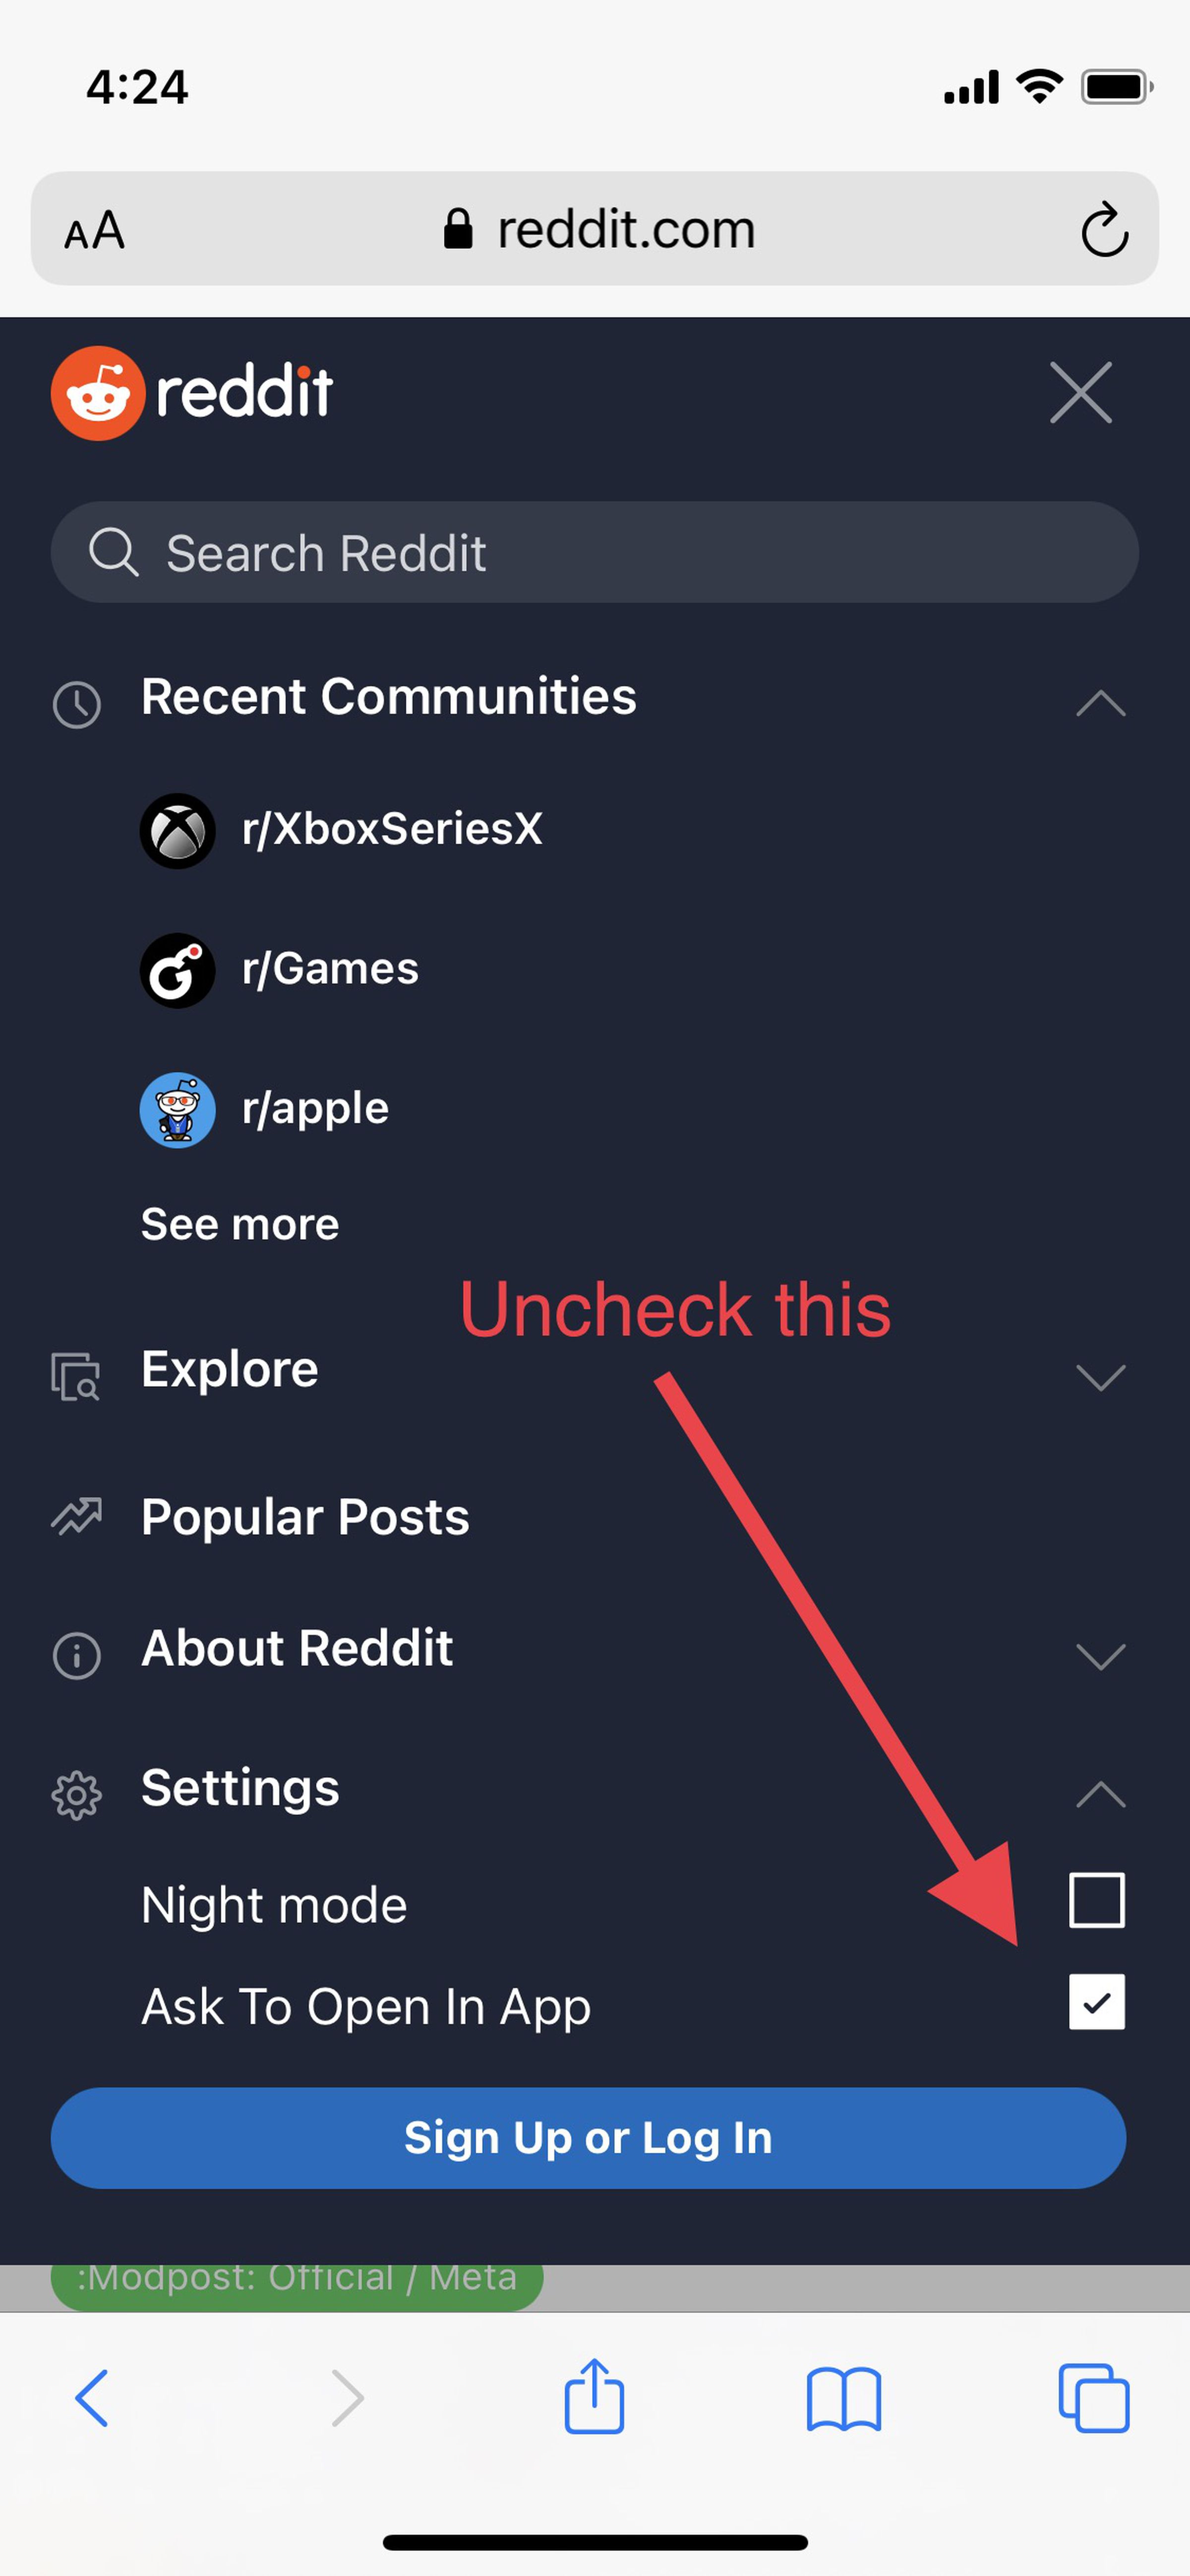 Uncheck the “Ask To Open In App” option to banish the banner.